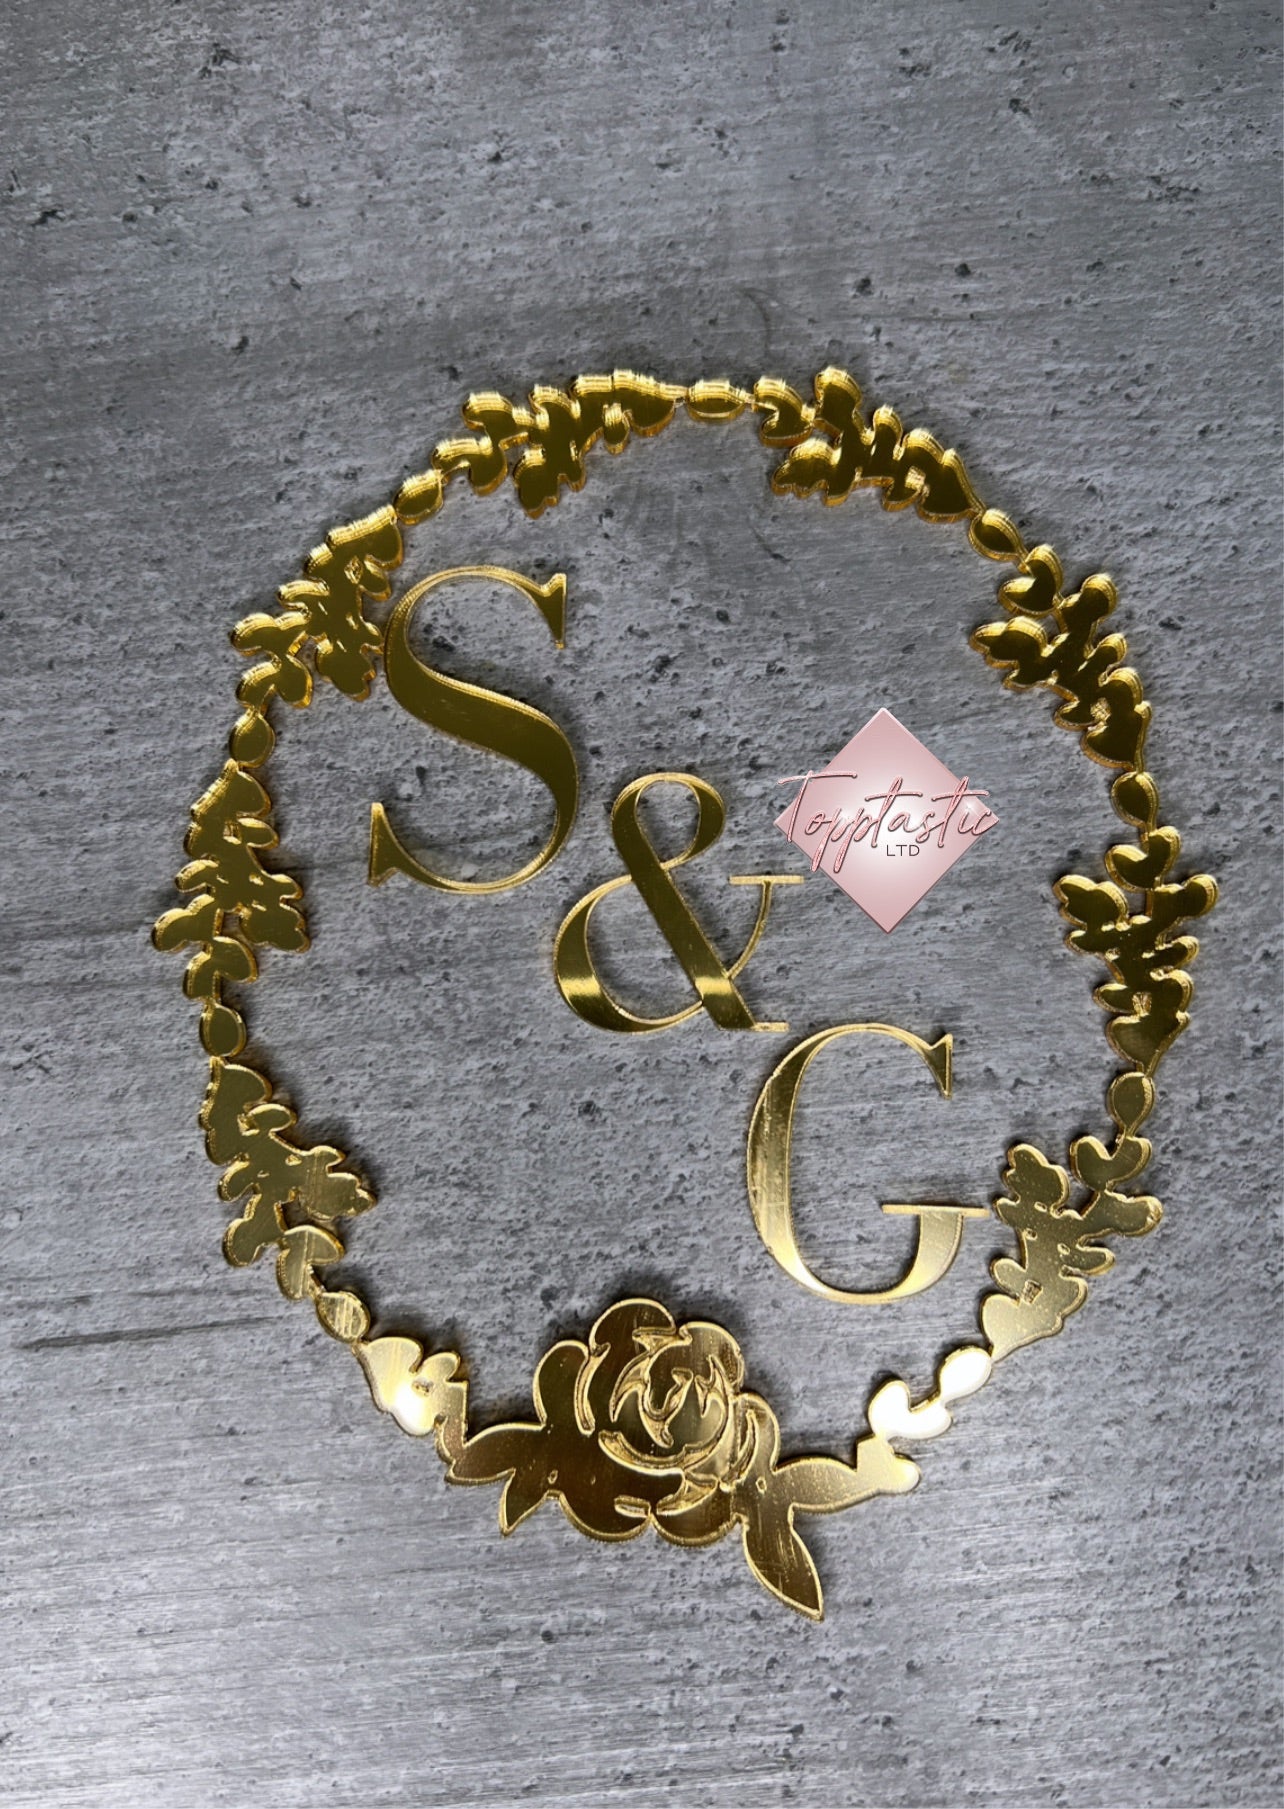 Floral wreath/ frame and Initial Set